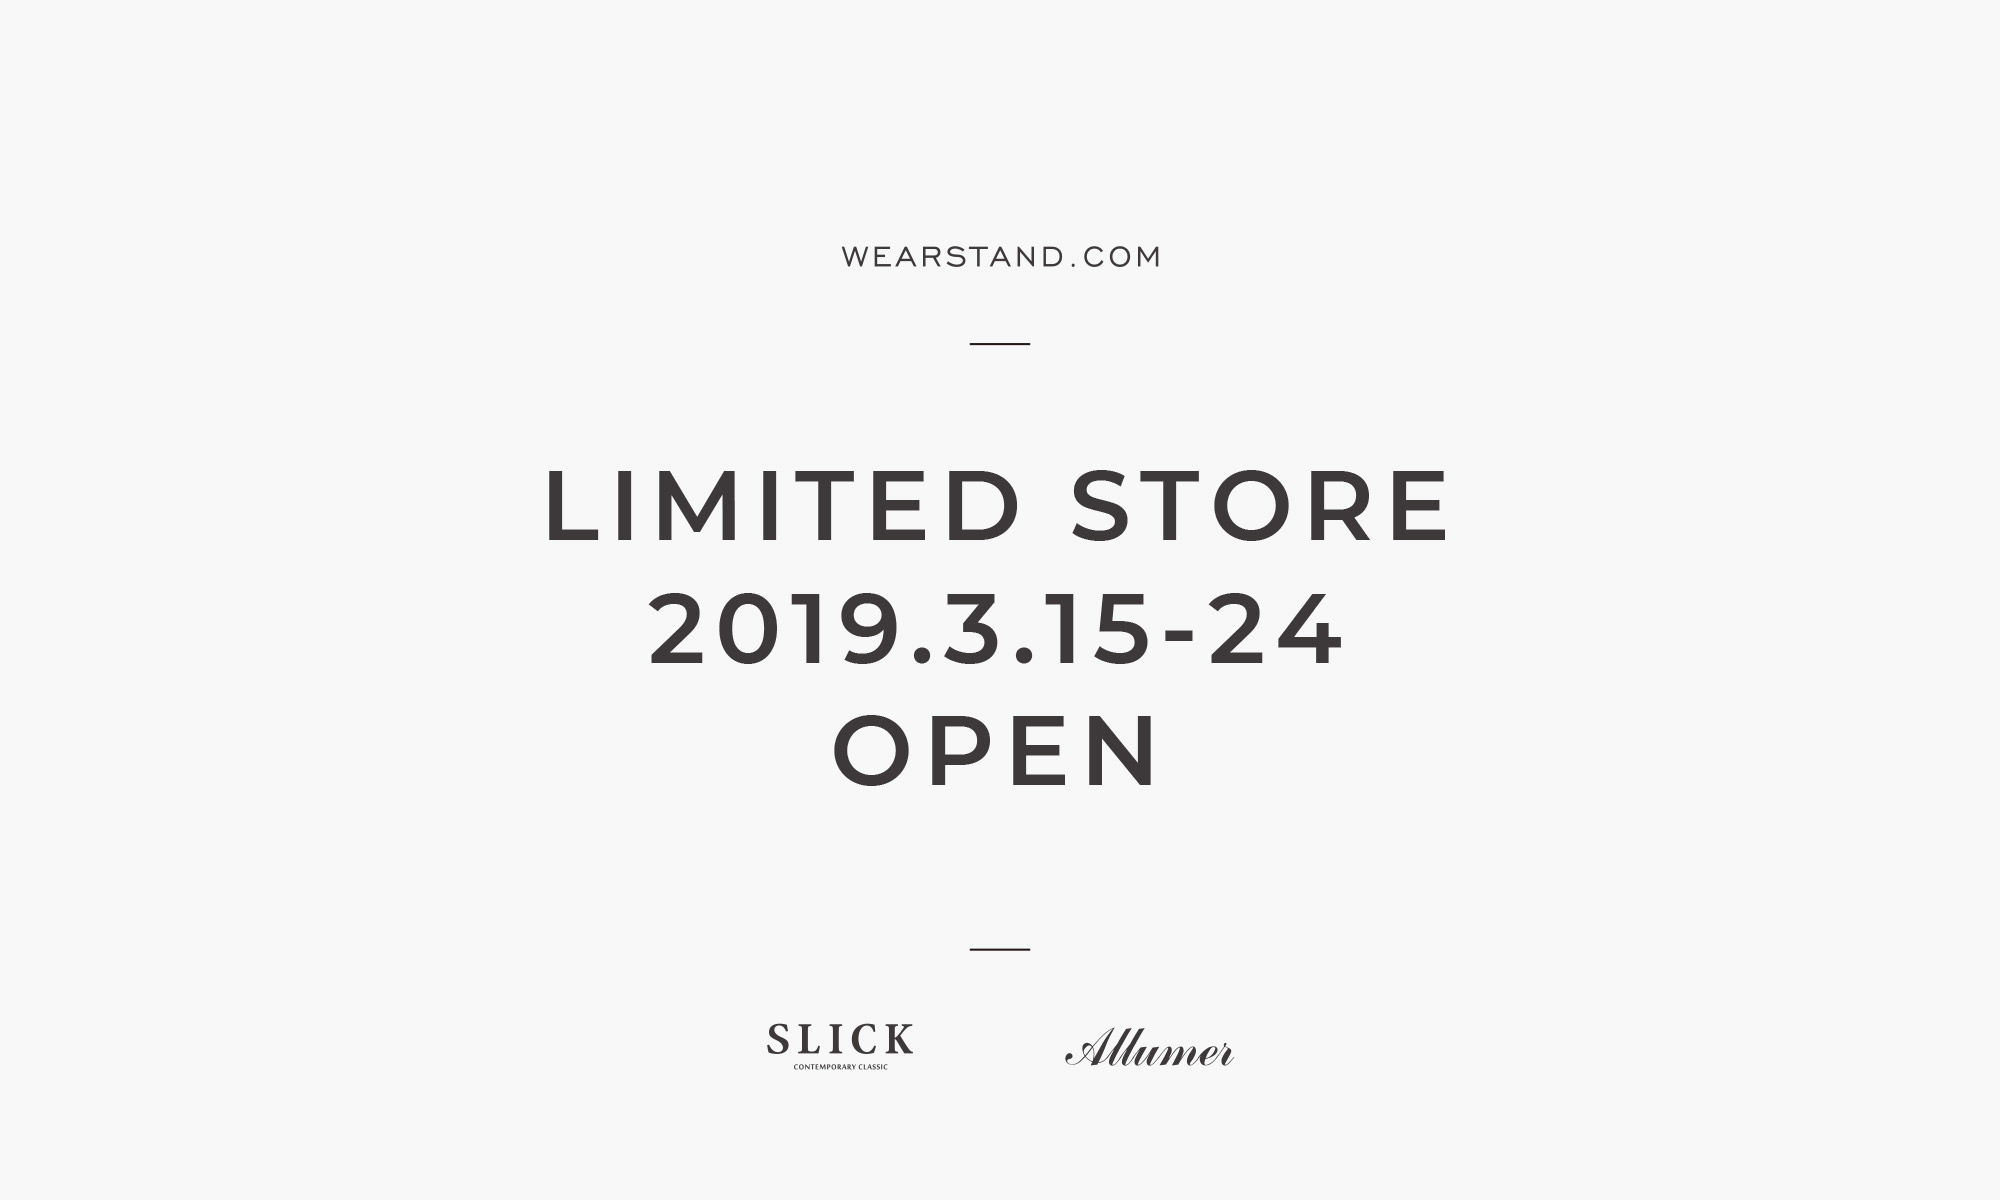 WEARSTAND LIMITED STORE